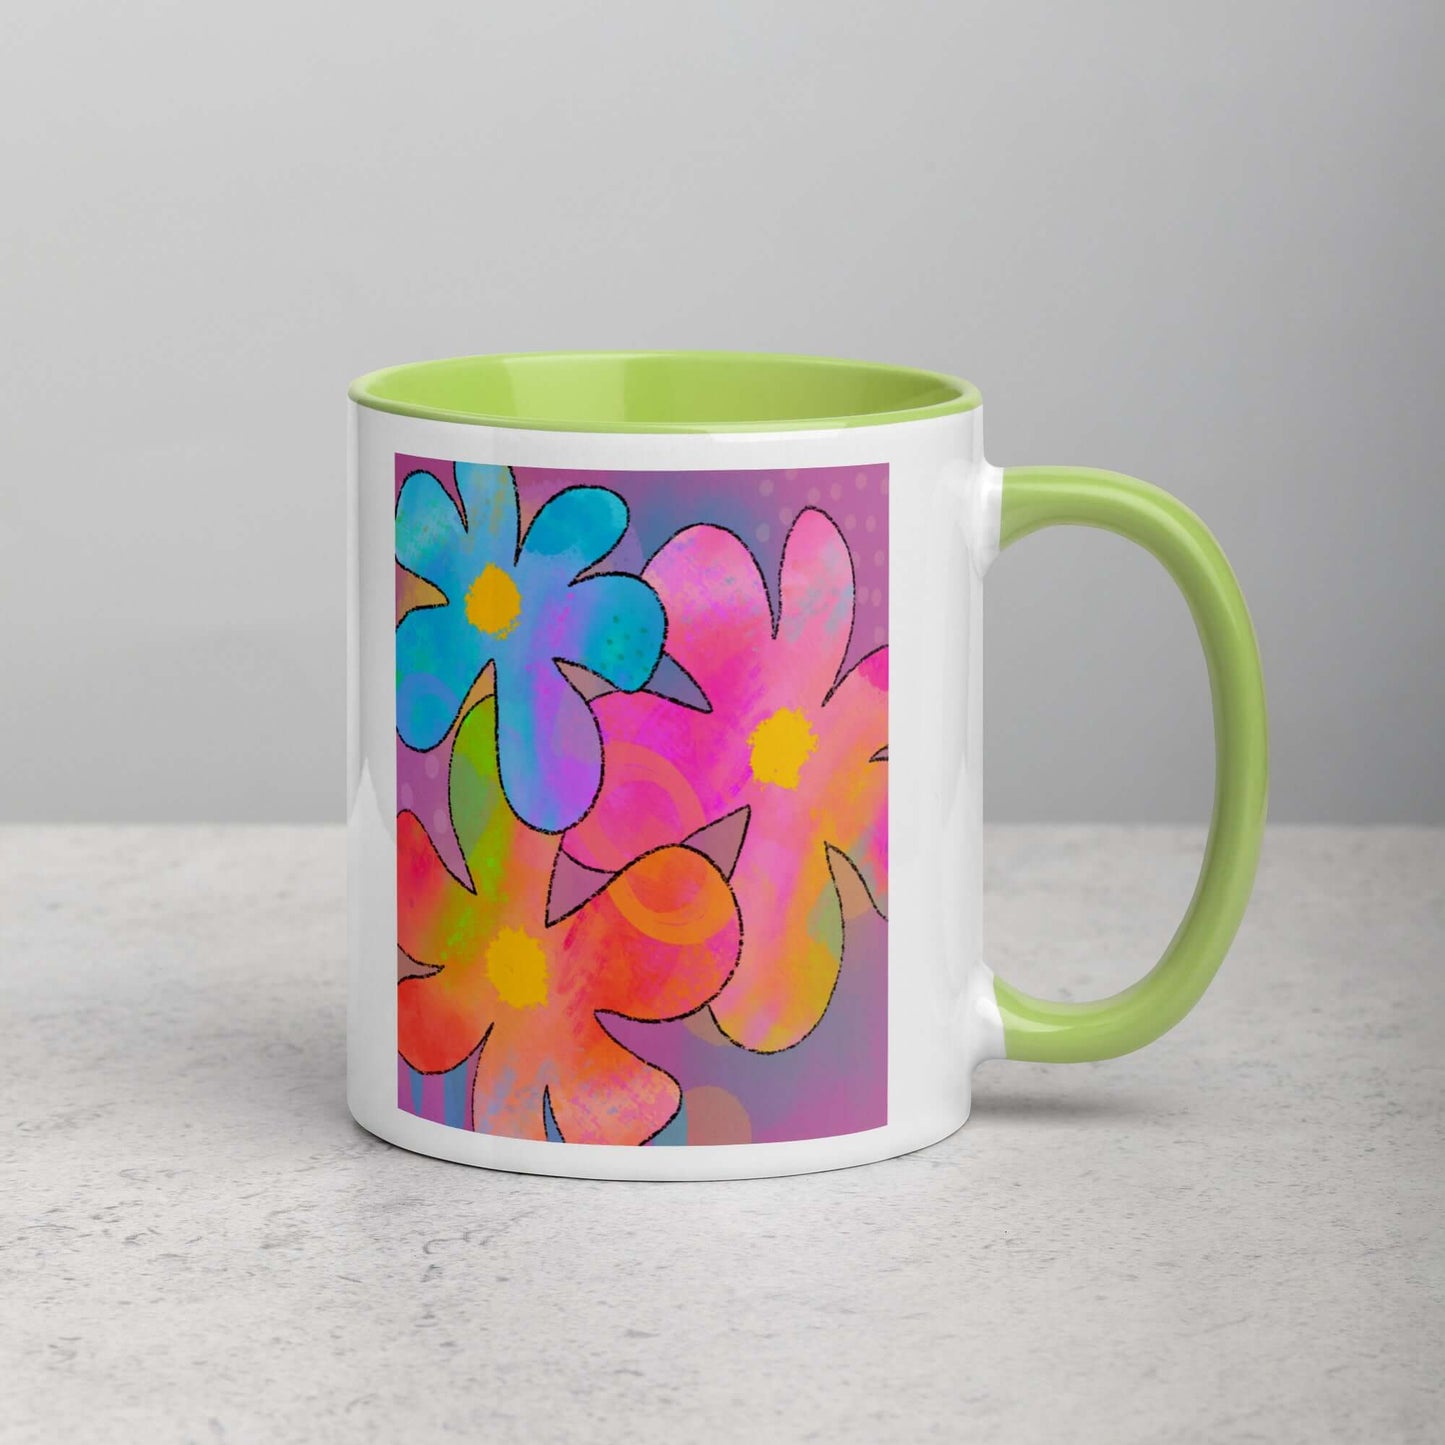 Big Colorful 1960s Psychedelic “Hippie Flowers” Mug with Lime Green Color Inside Right Handed Front View